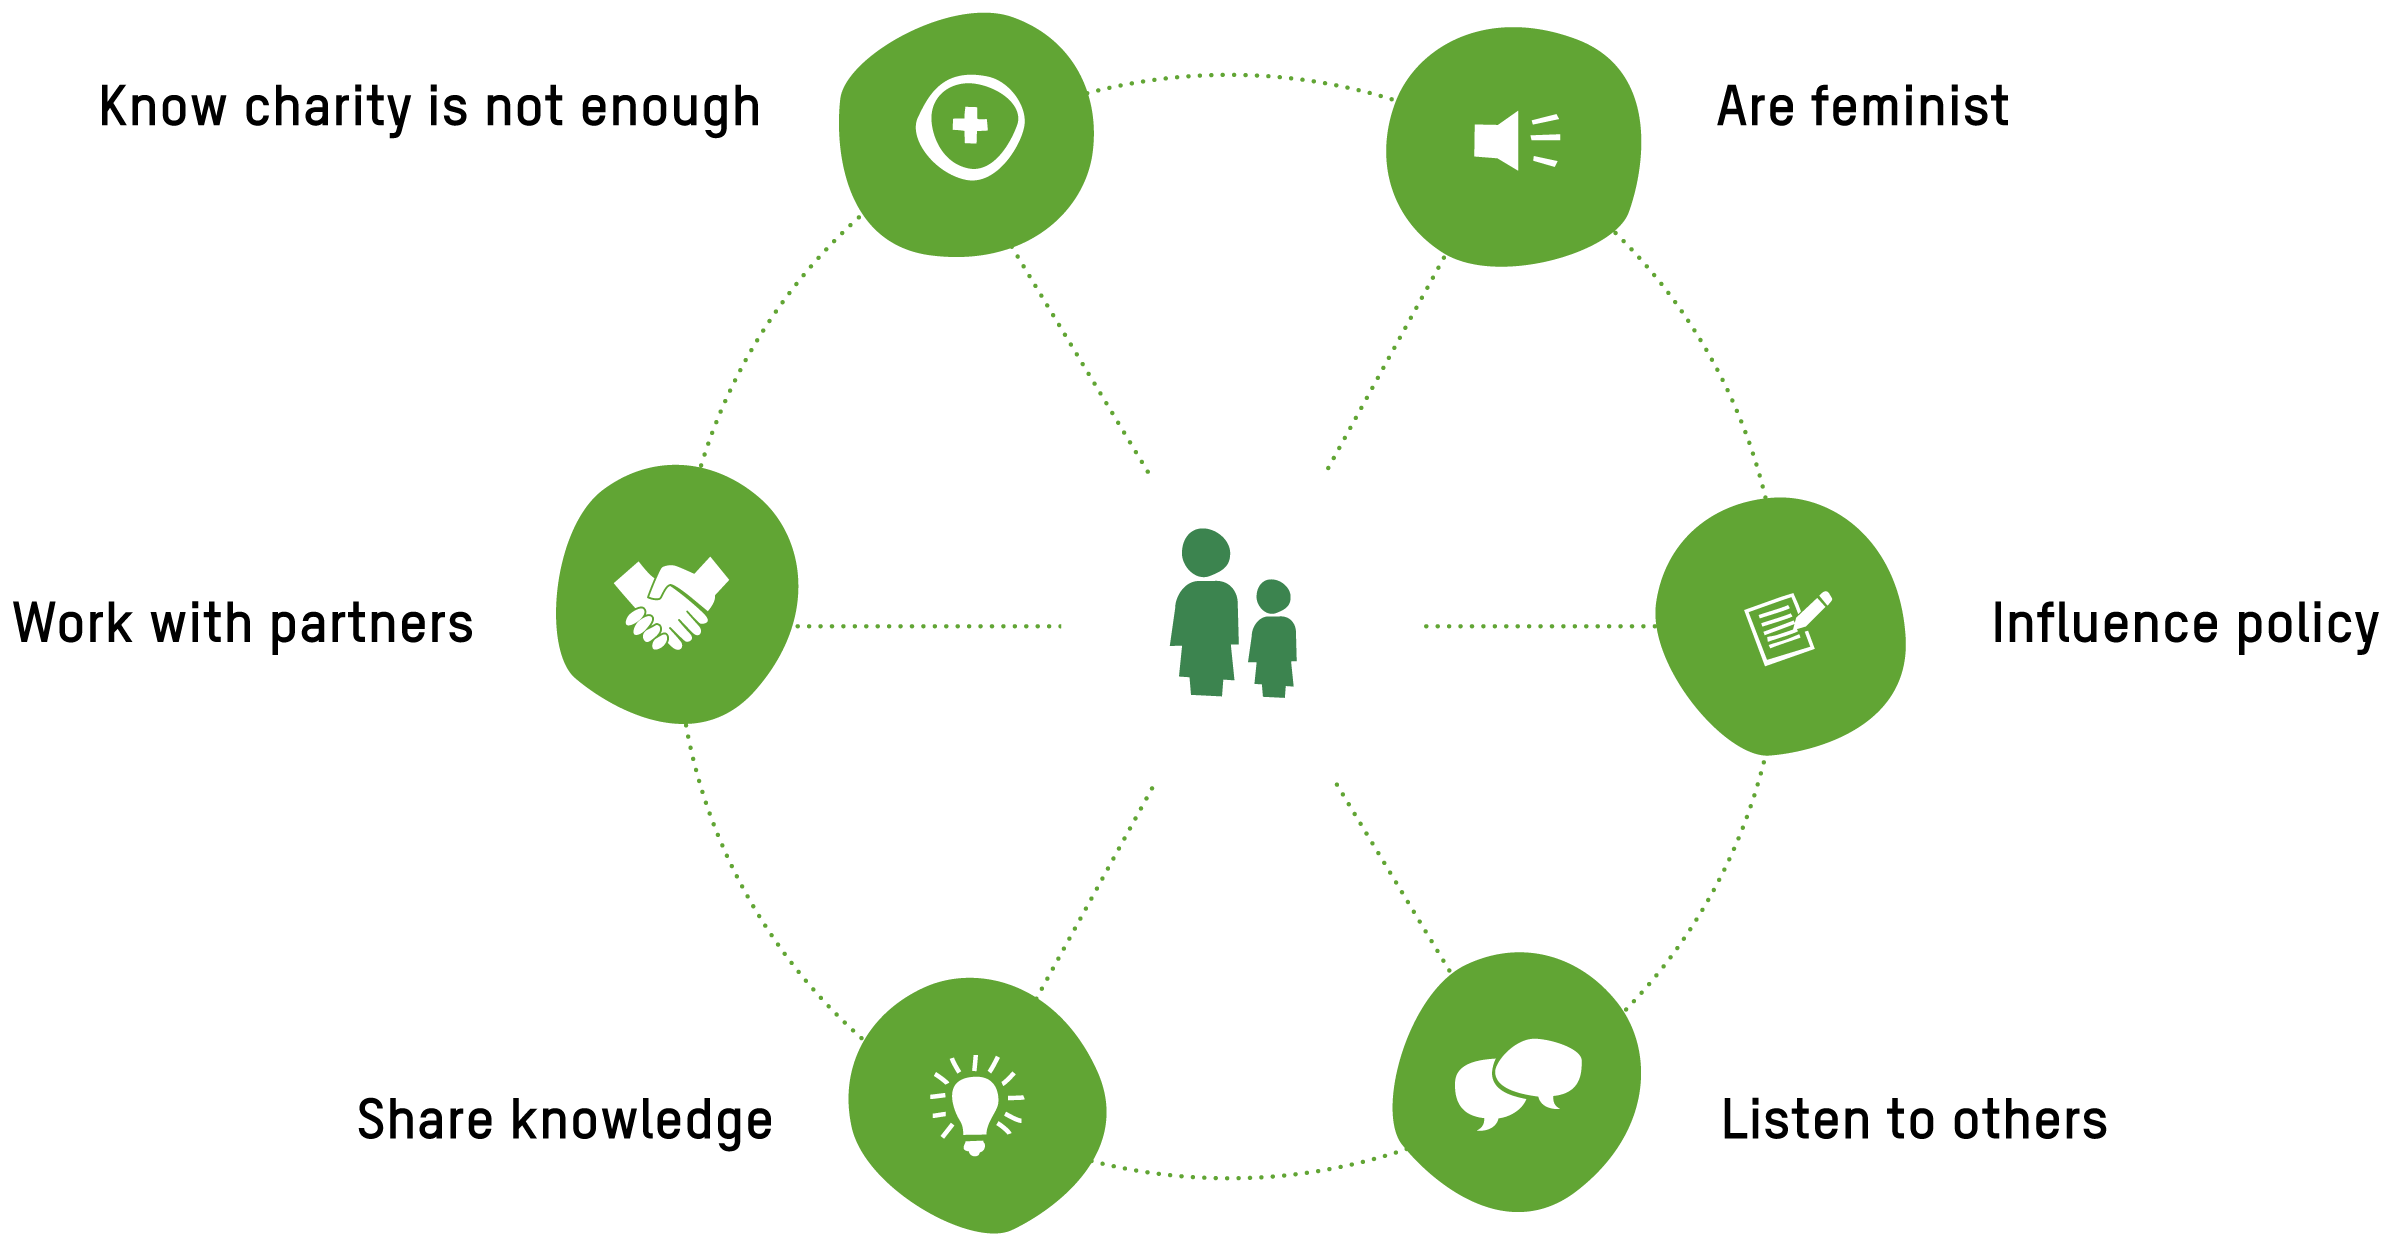 This is a diagram that explains the 6 elements of Oxfam's approach: Know charity is not enough, Work with partners, Share knowledge, Be feminist, Influence policy and Listen to others. For each element of the approach, there is a decorative icon to match the idea. At the centre of the diagram is a cartoon icon of a woman and a girl.